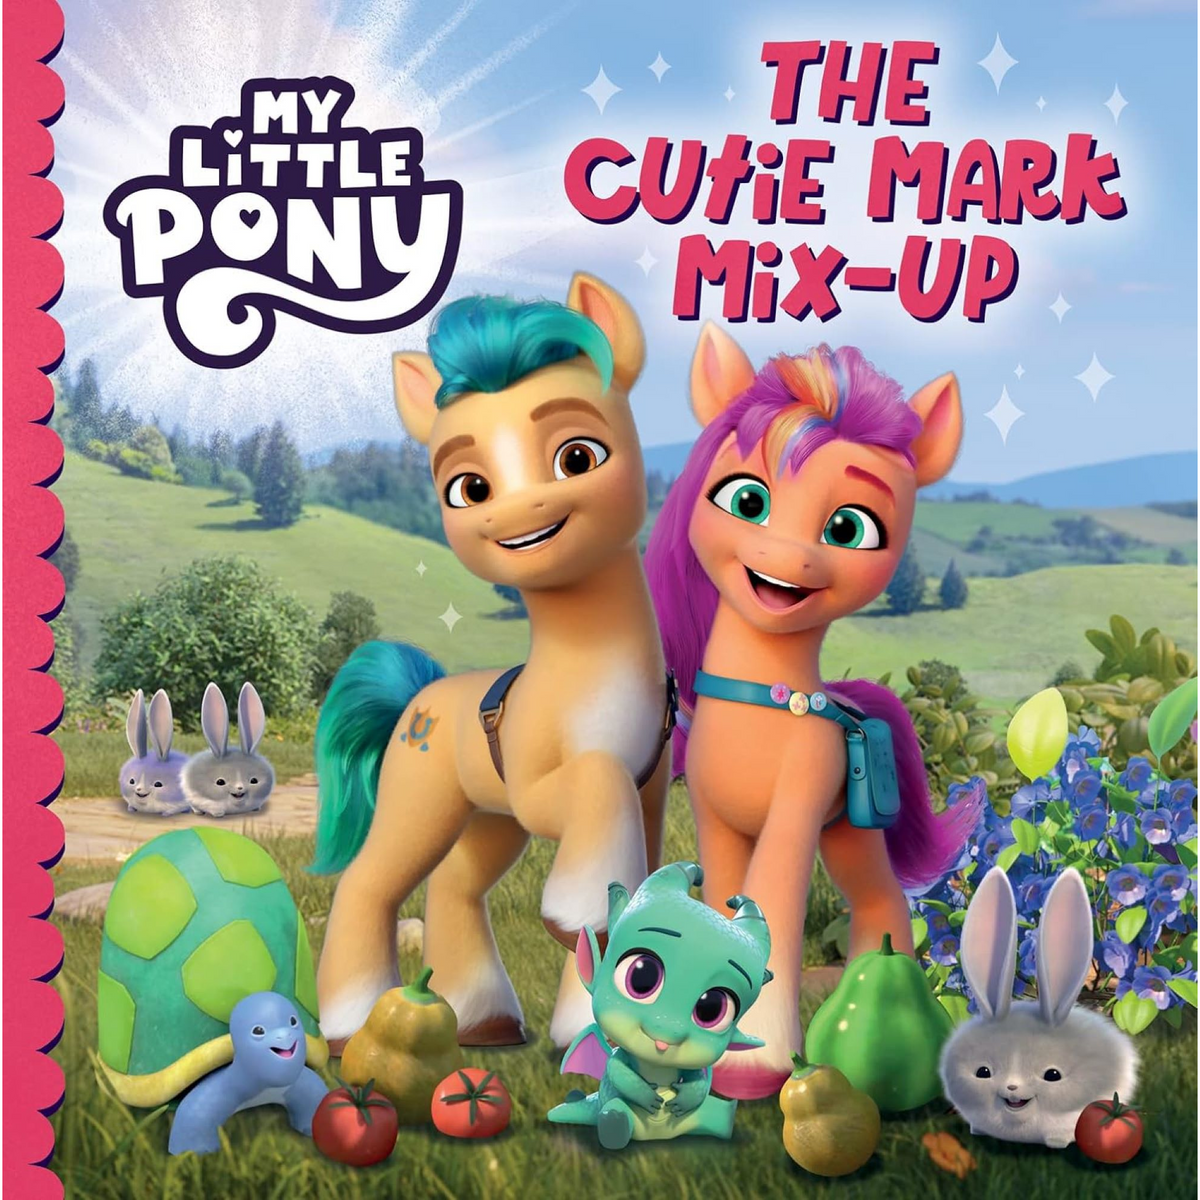 My Little Pony: The Cutie Mark Mix-Up